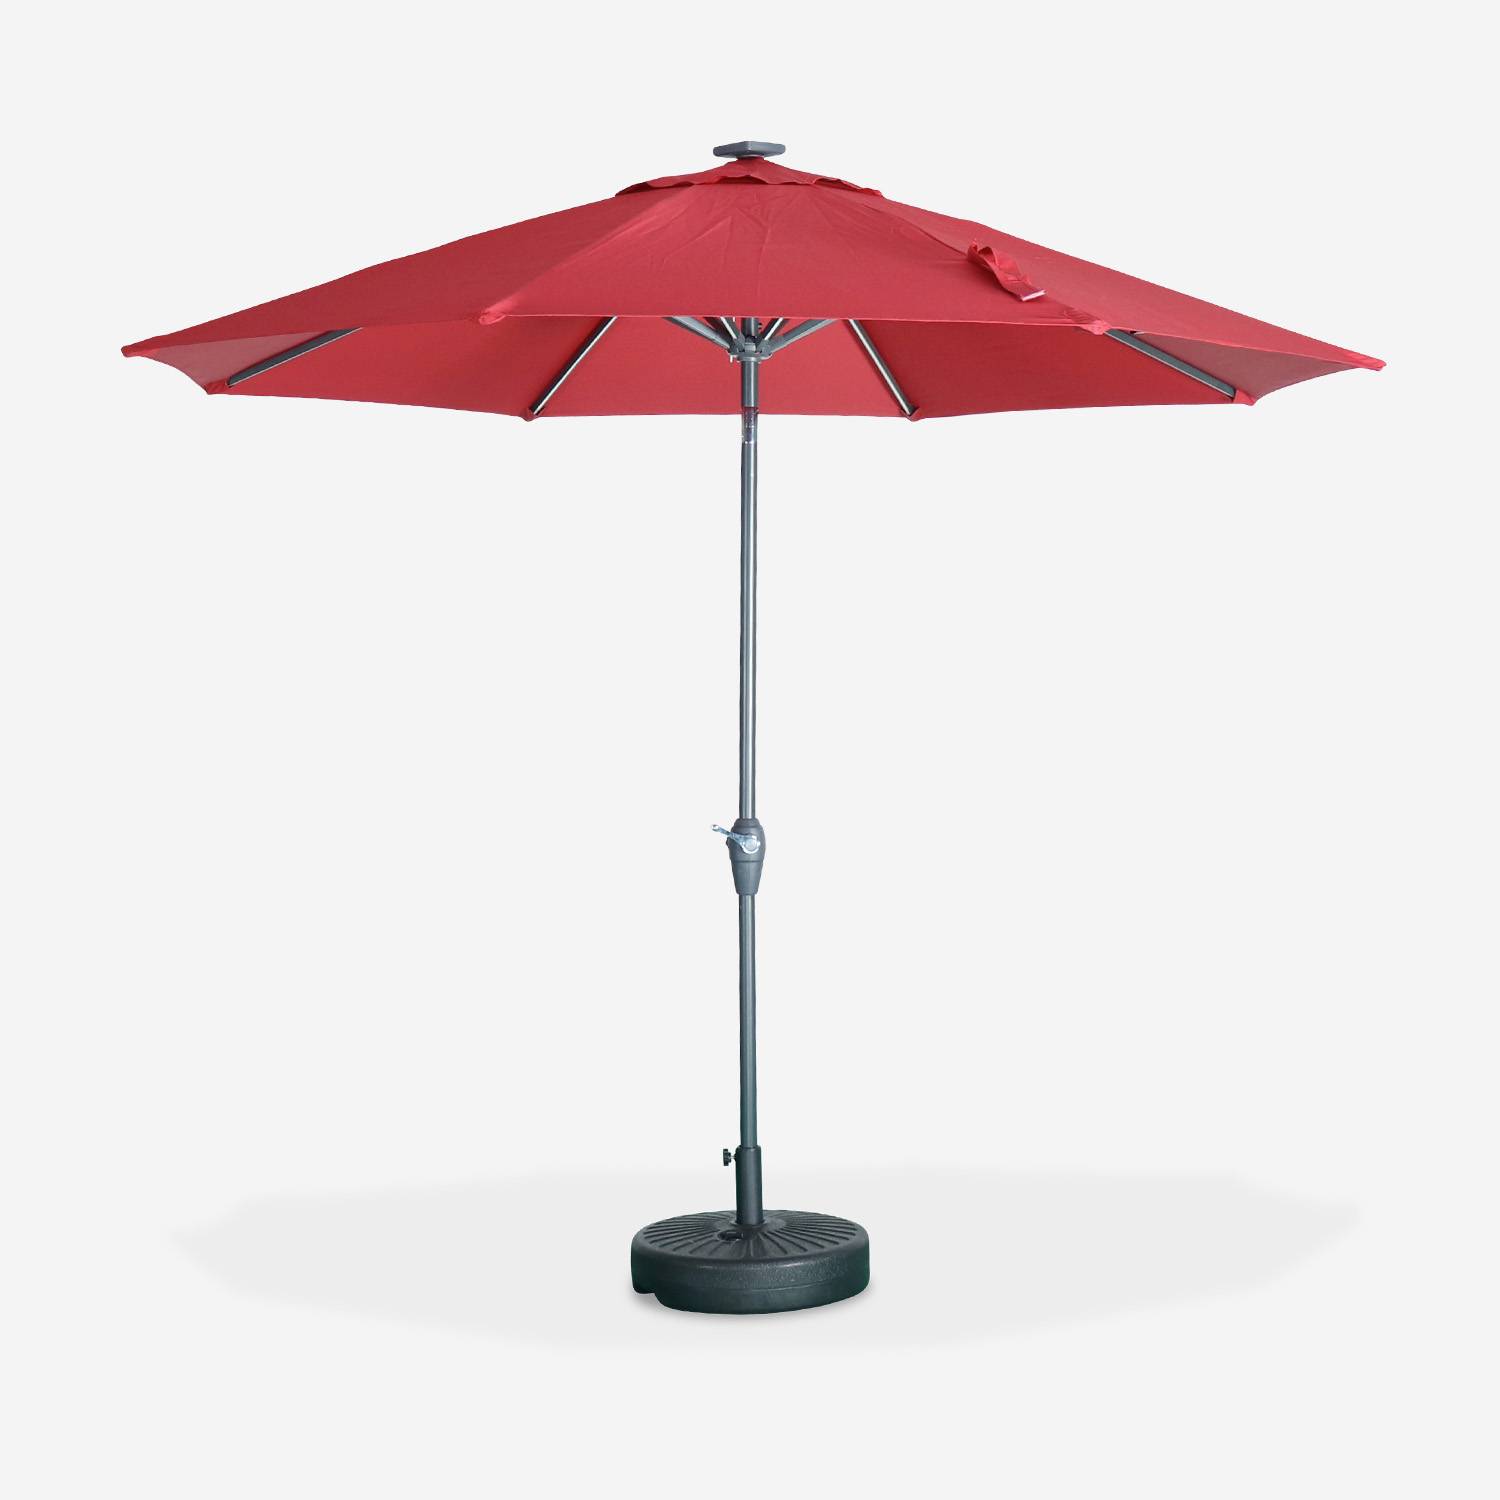 2.7m round centre pole LED parasol - adjustable aluminium central mast and crank handle opening - Helios - Red,sweeek,Photo1